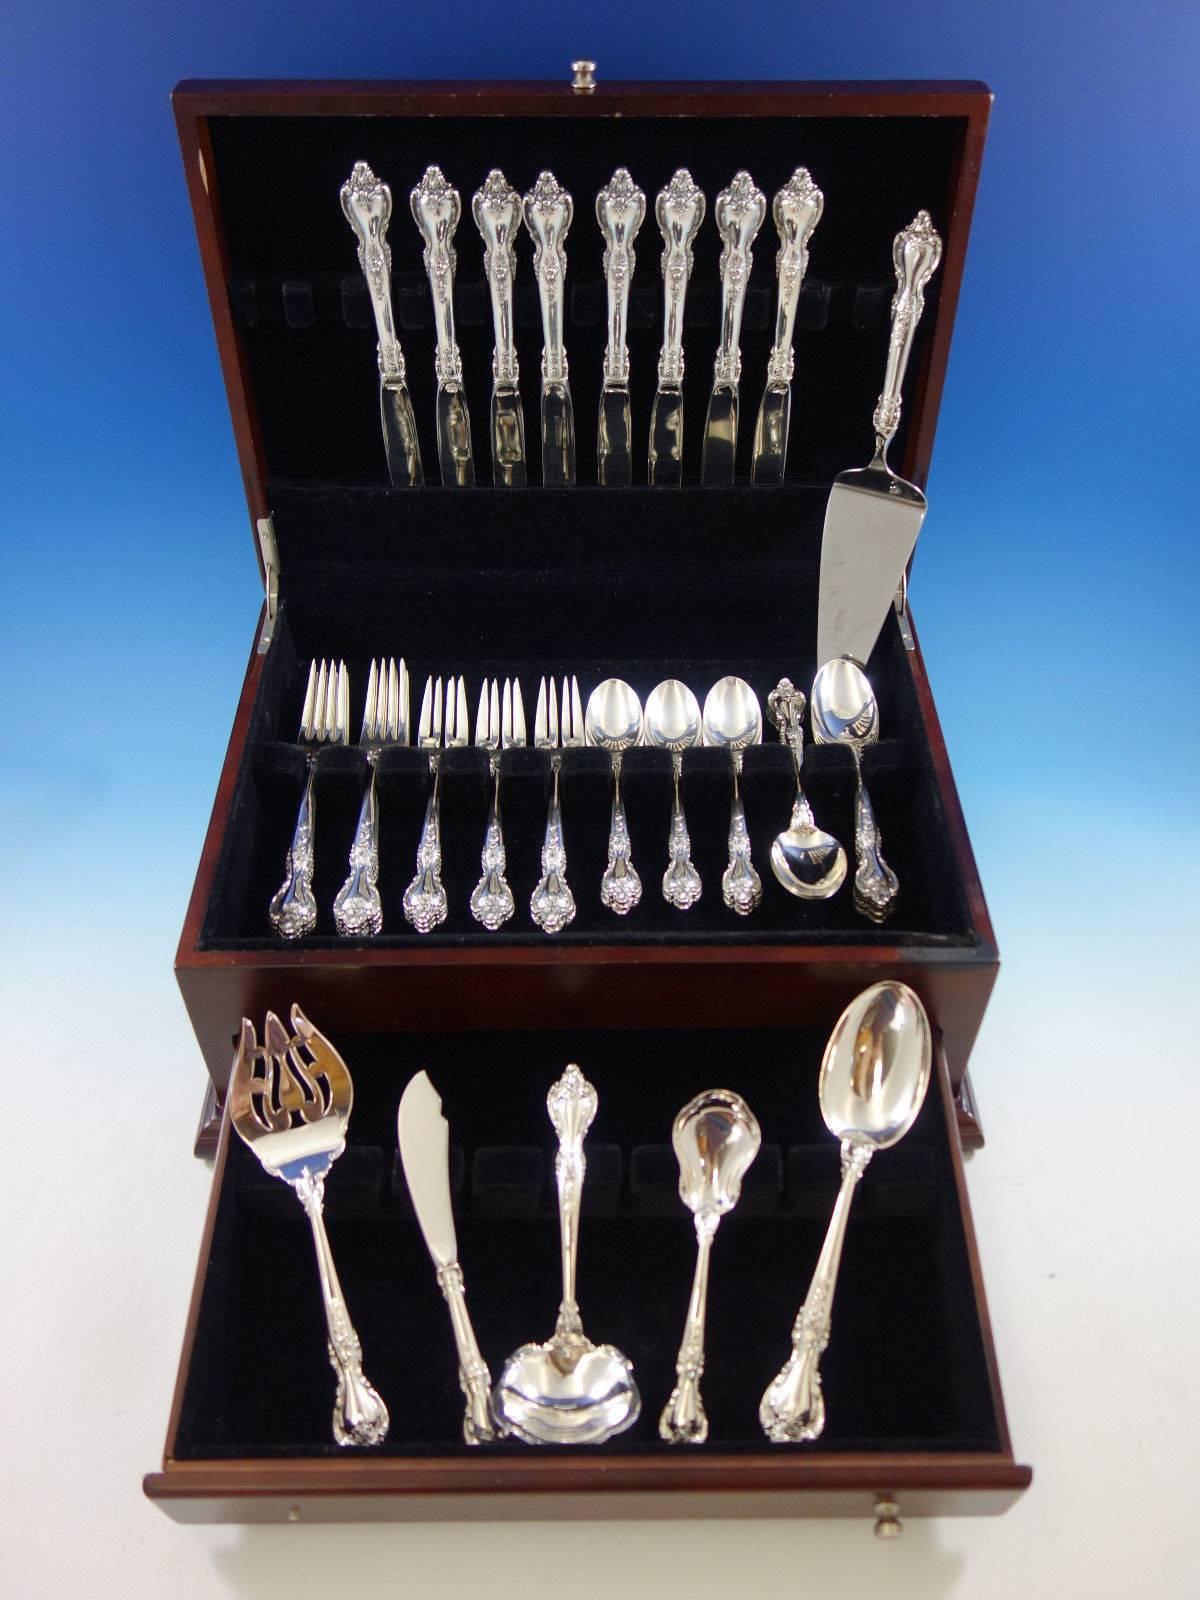 Delacourt by Lunt Sterling silver flatware set of 46 pieces. This set includes: Eight knives, 9